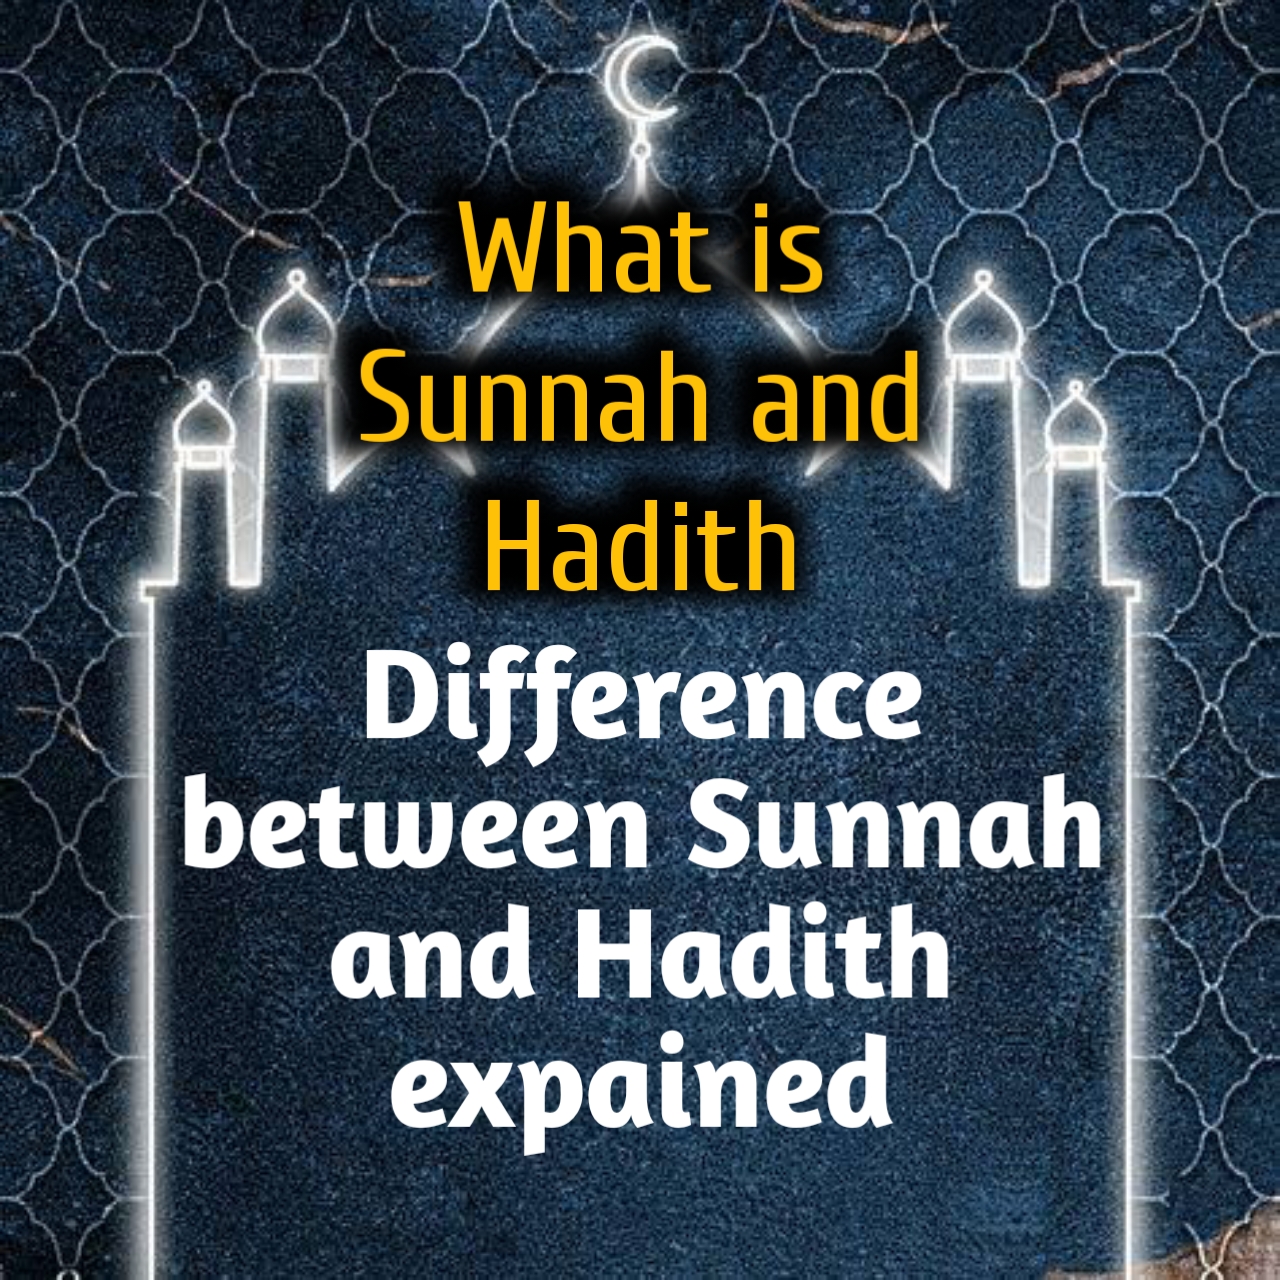 Difference between Sunnah and Hadith,